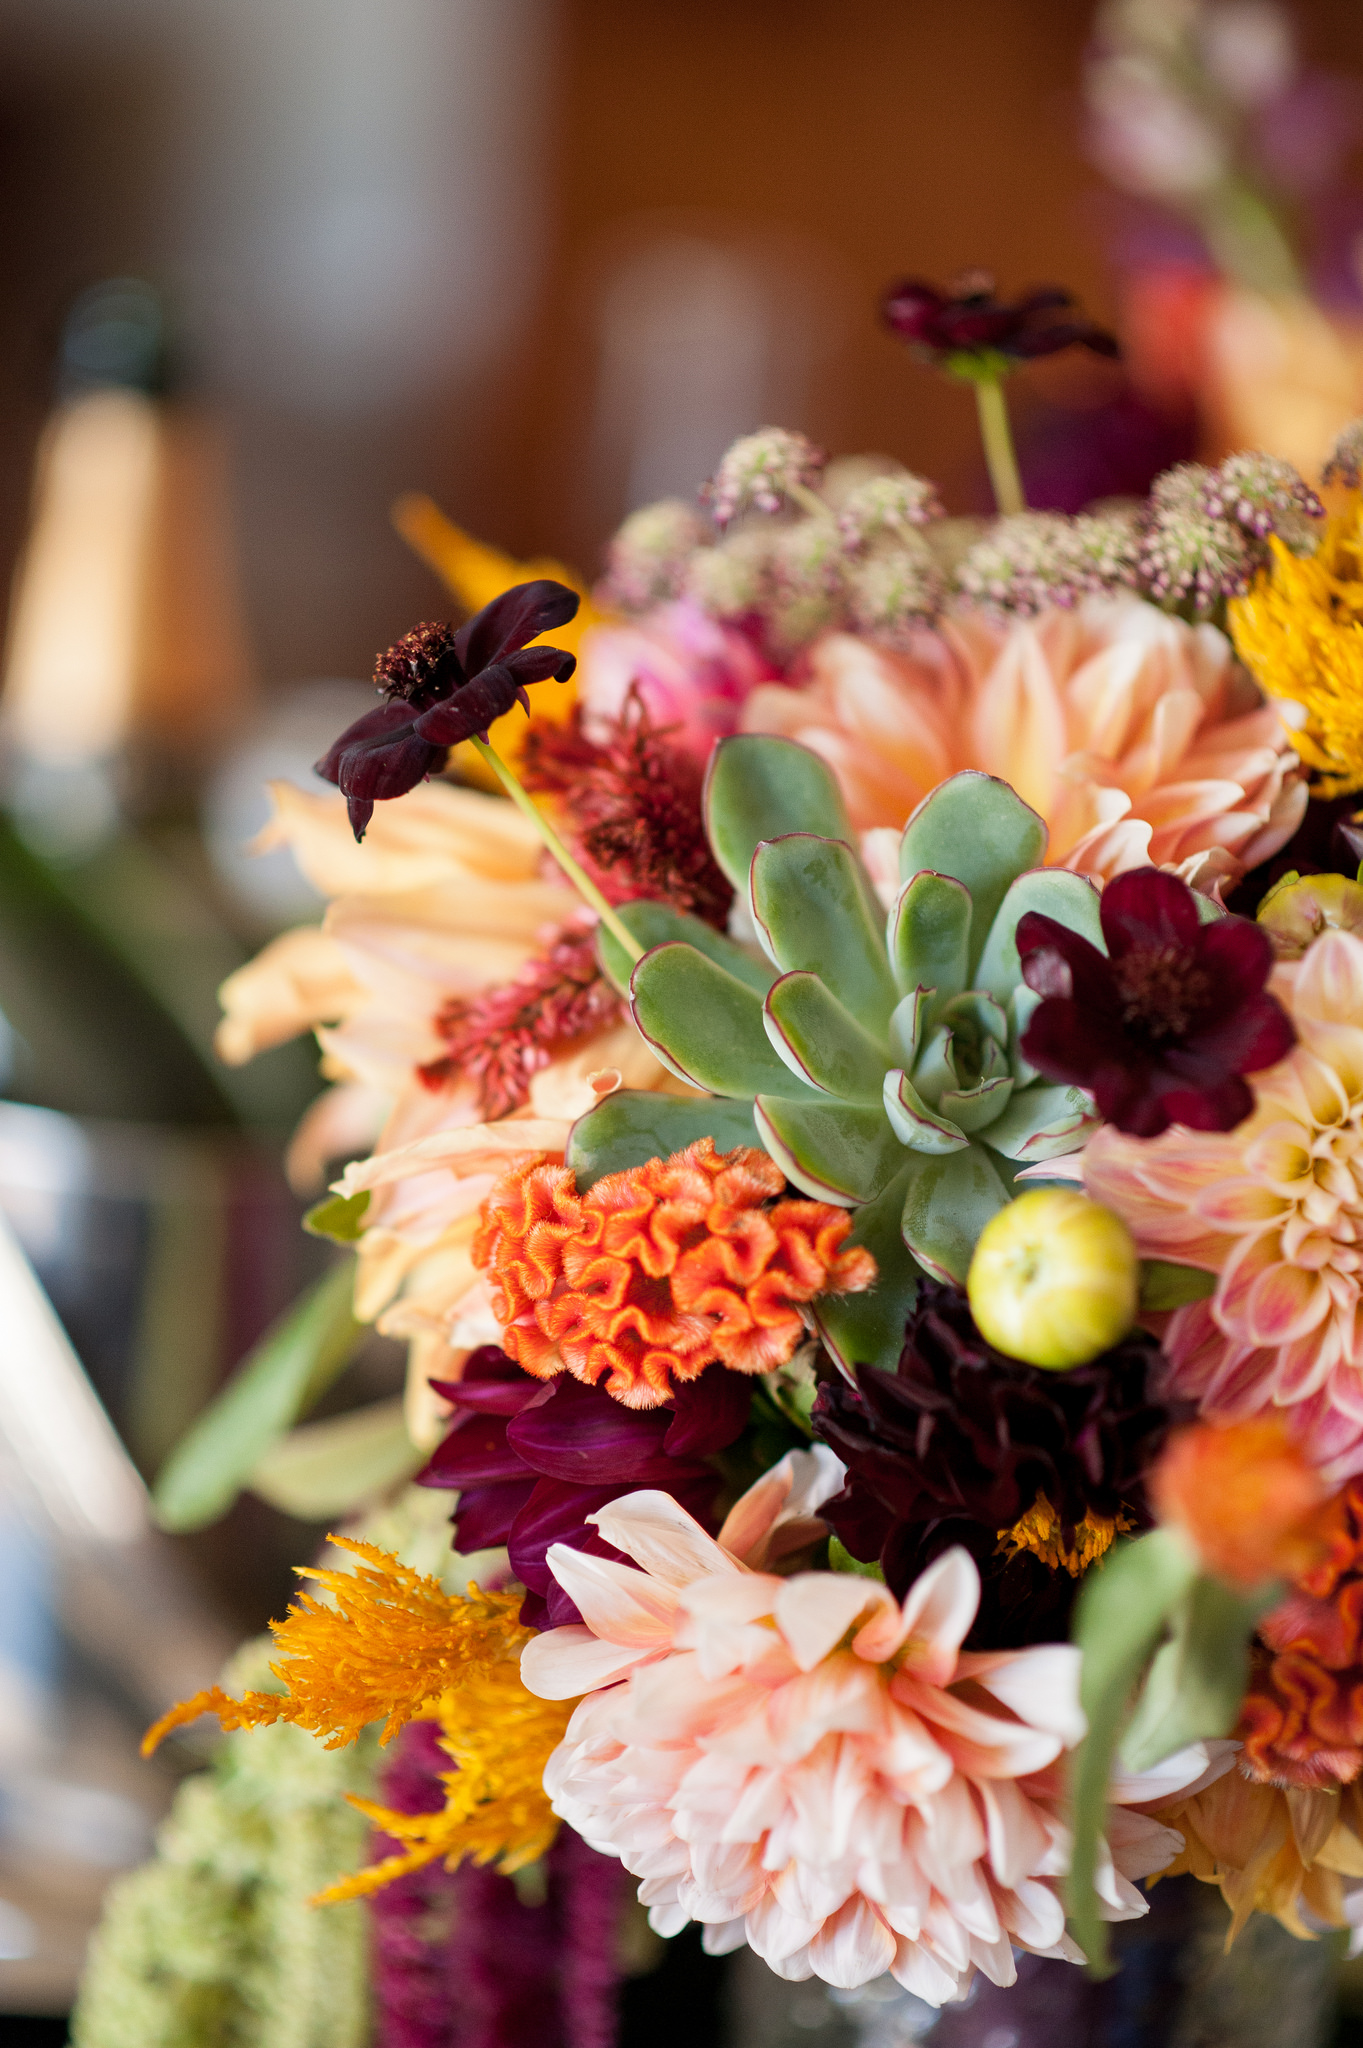 How To: Make A Bright Colorful Wedding Bouquet | A Practical Wedding